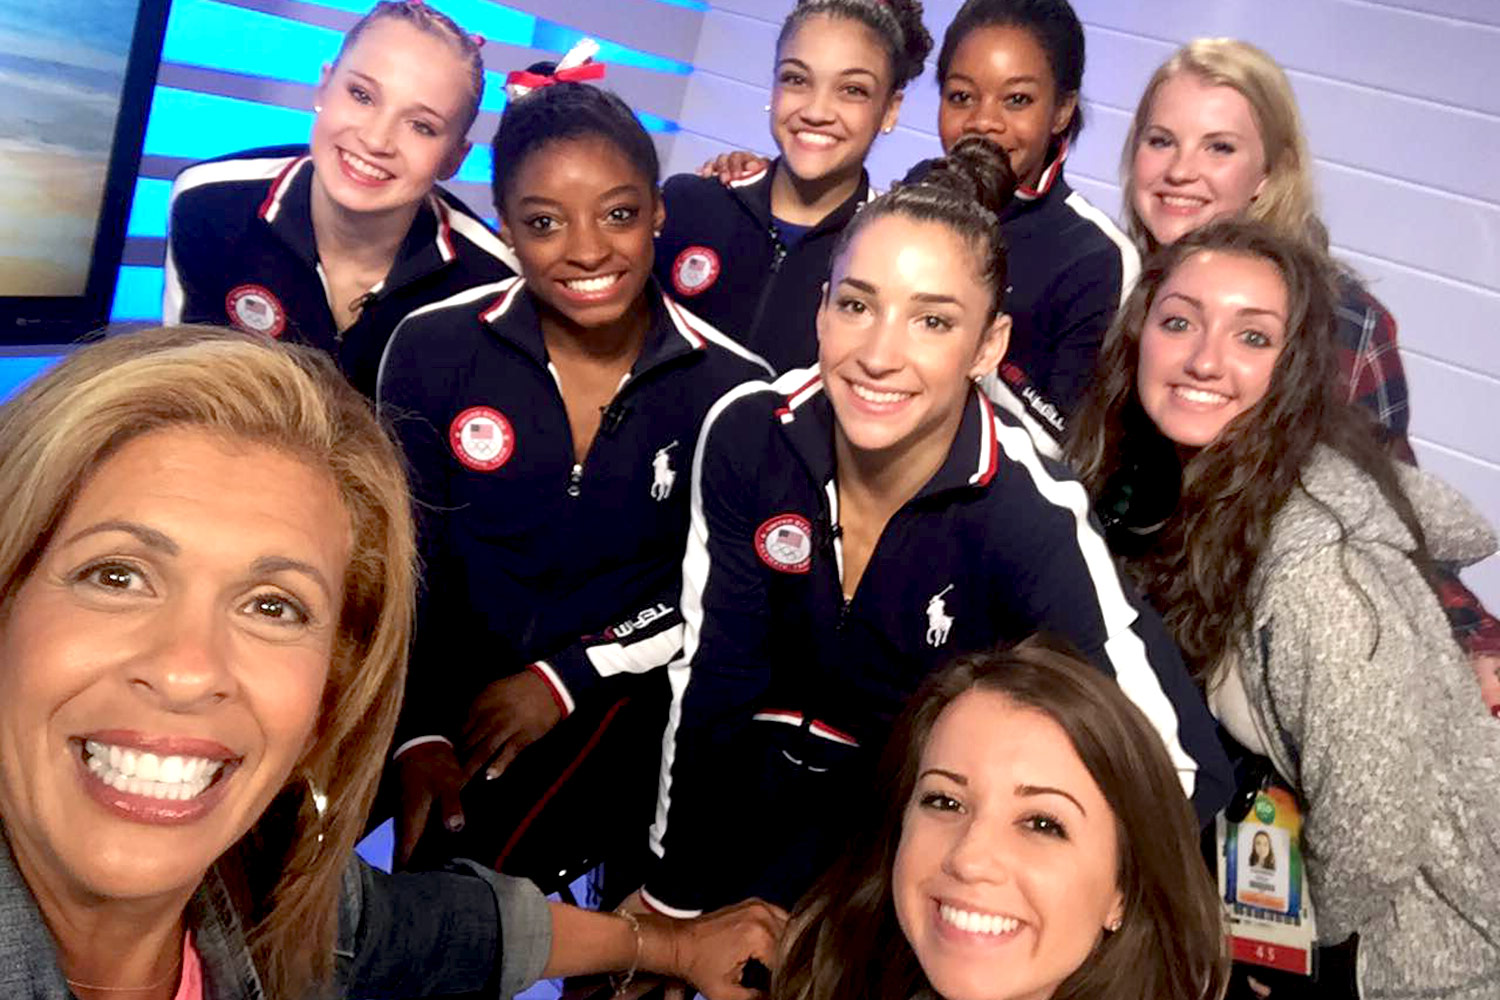 D’Elia, far right, and another NBC runner pose with the U.S. women’s gymnastics team and “Today” co-host Hoda Kotb.